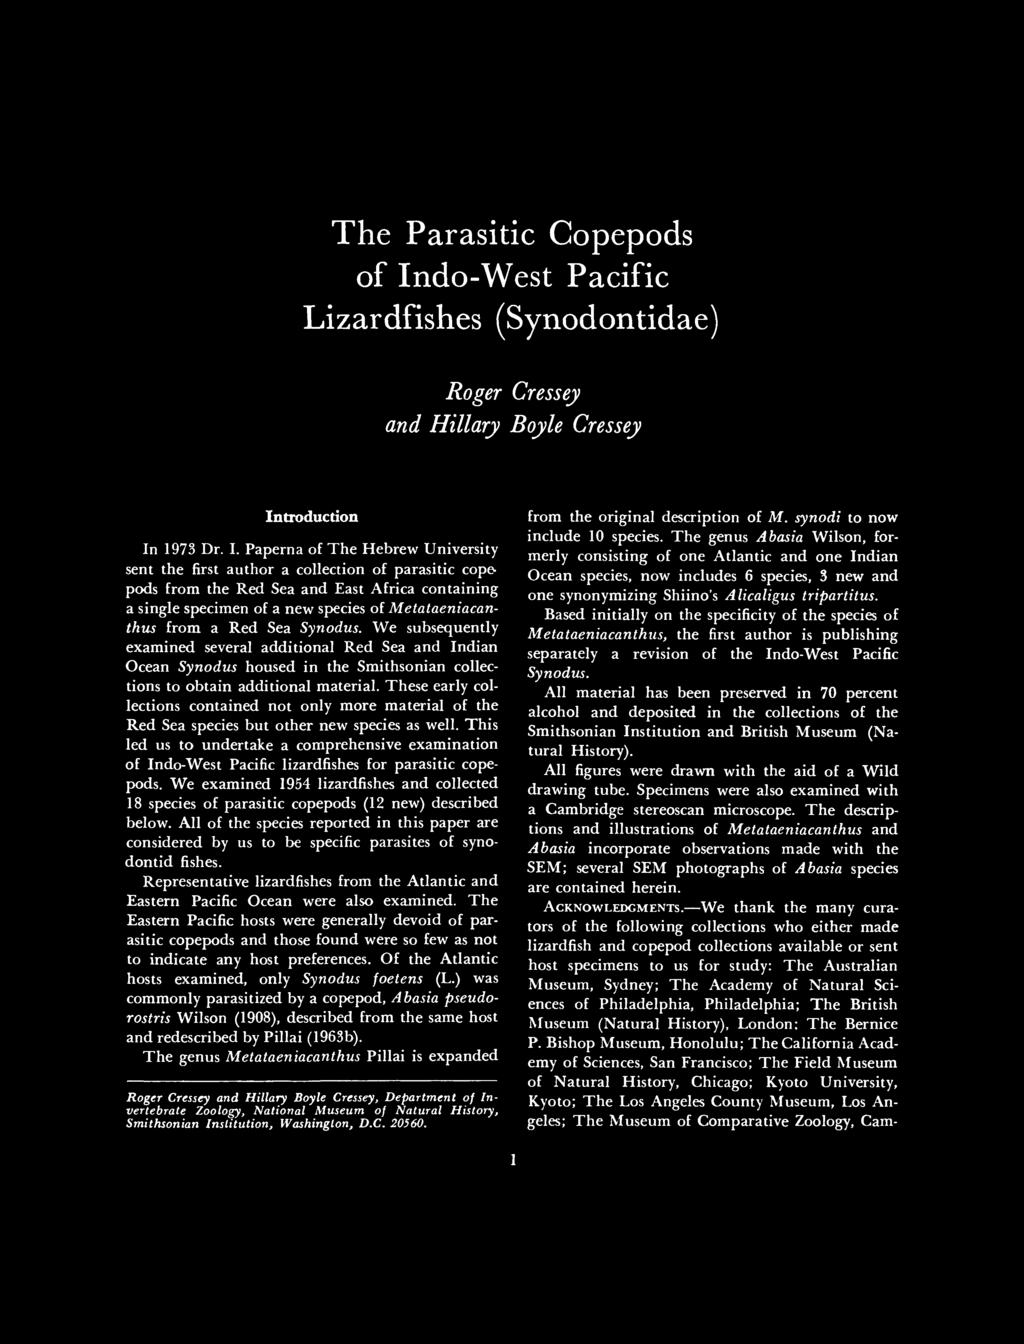 The Parasitic Copepods of In